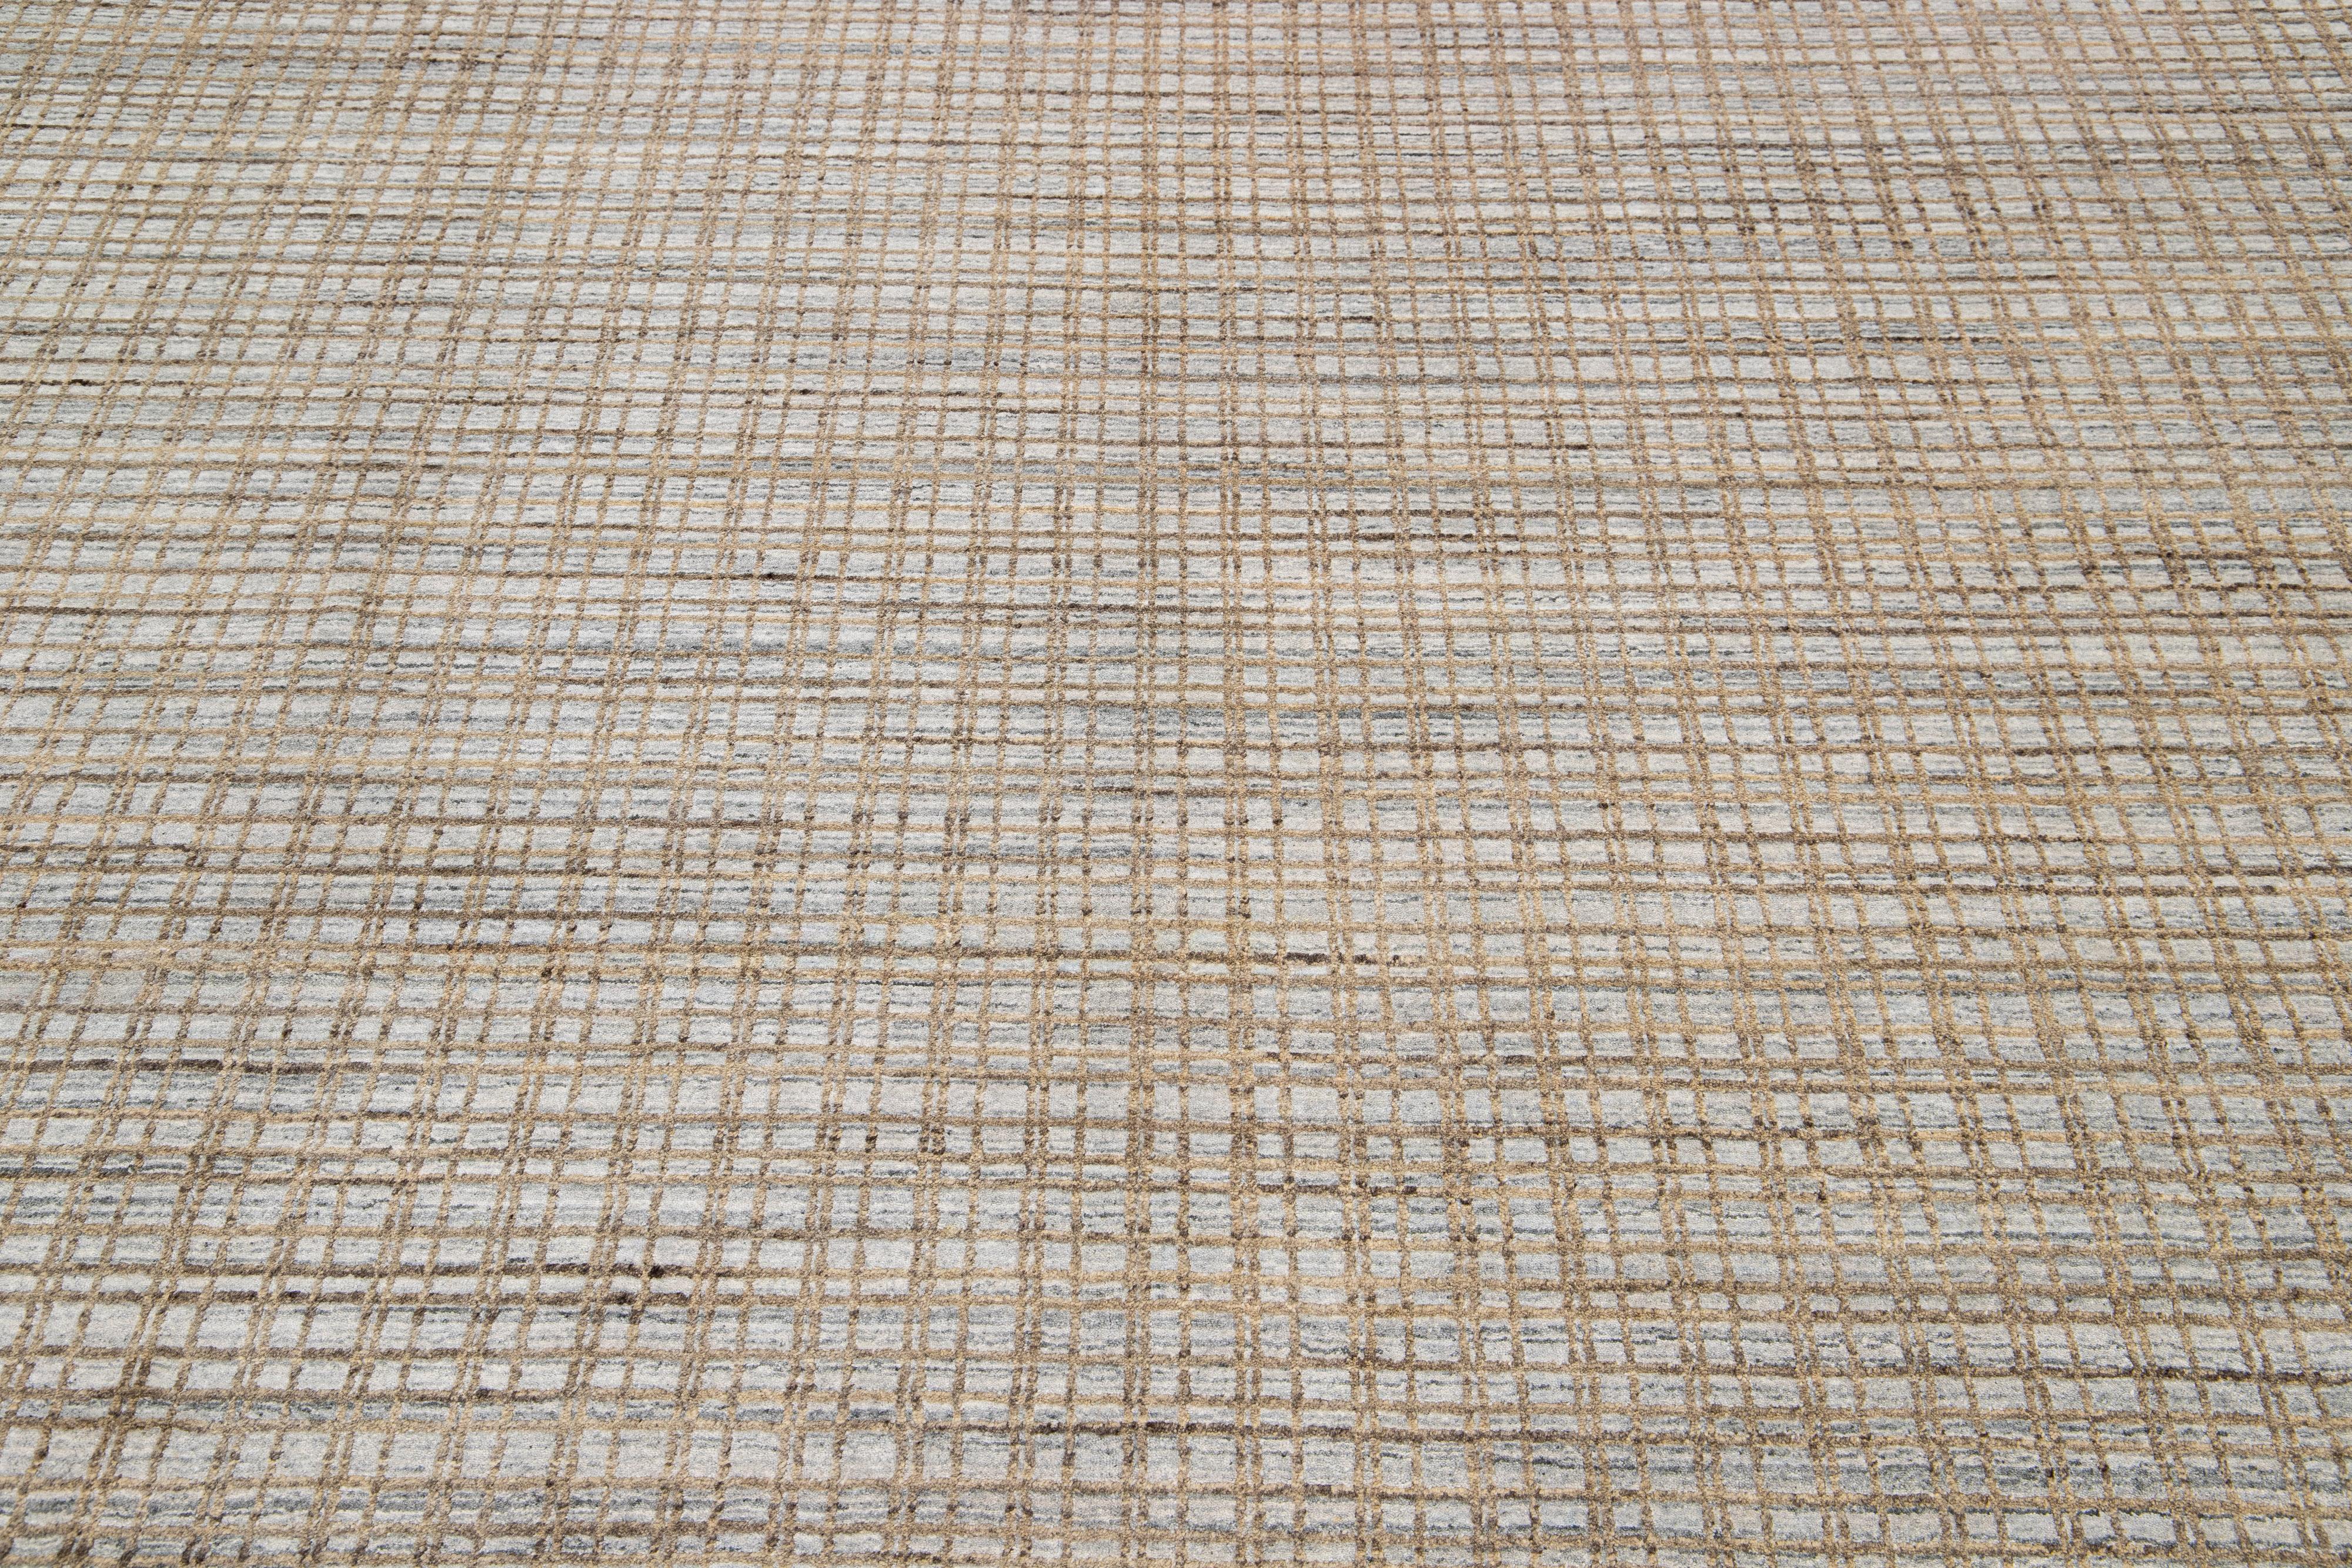 This rug is woven from a blend of Indian wool and silk and showcases a monochrome gray base with an intricate geometric pattern featuring complementary brown and golden tones.

This rug measures 8' x 10'.

Our rugs are professional cleaning